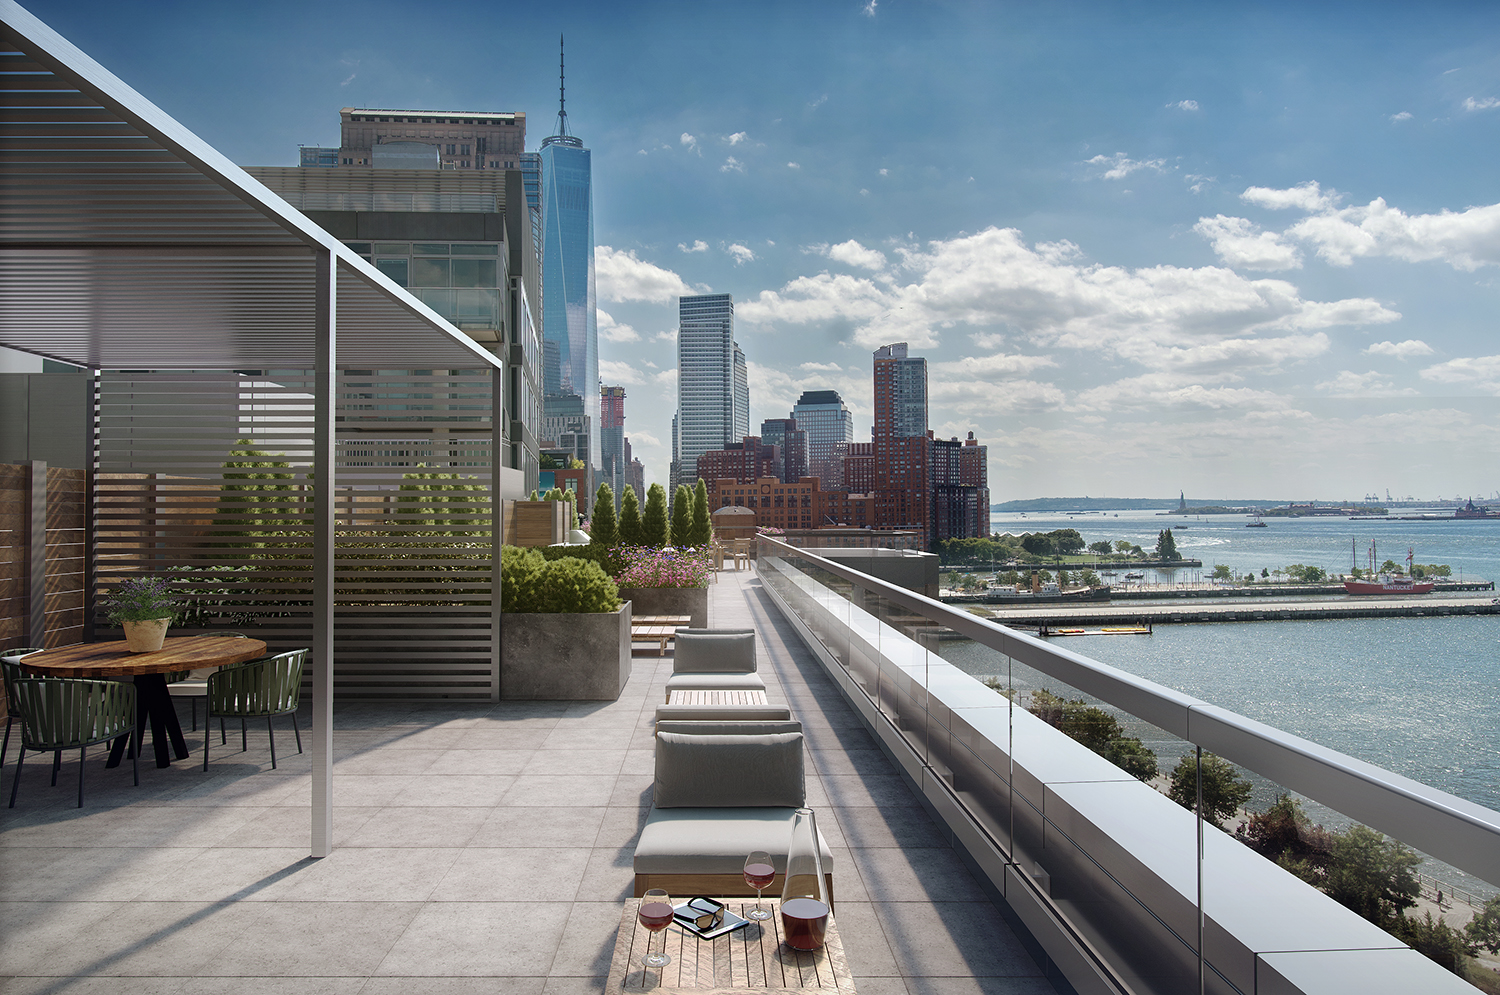 Rendering of the roof view at 456 Washington Street. Exclusive to YIMBY.